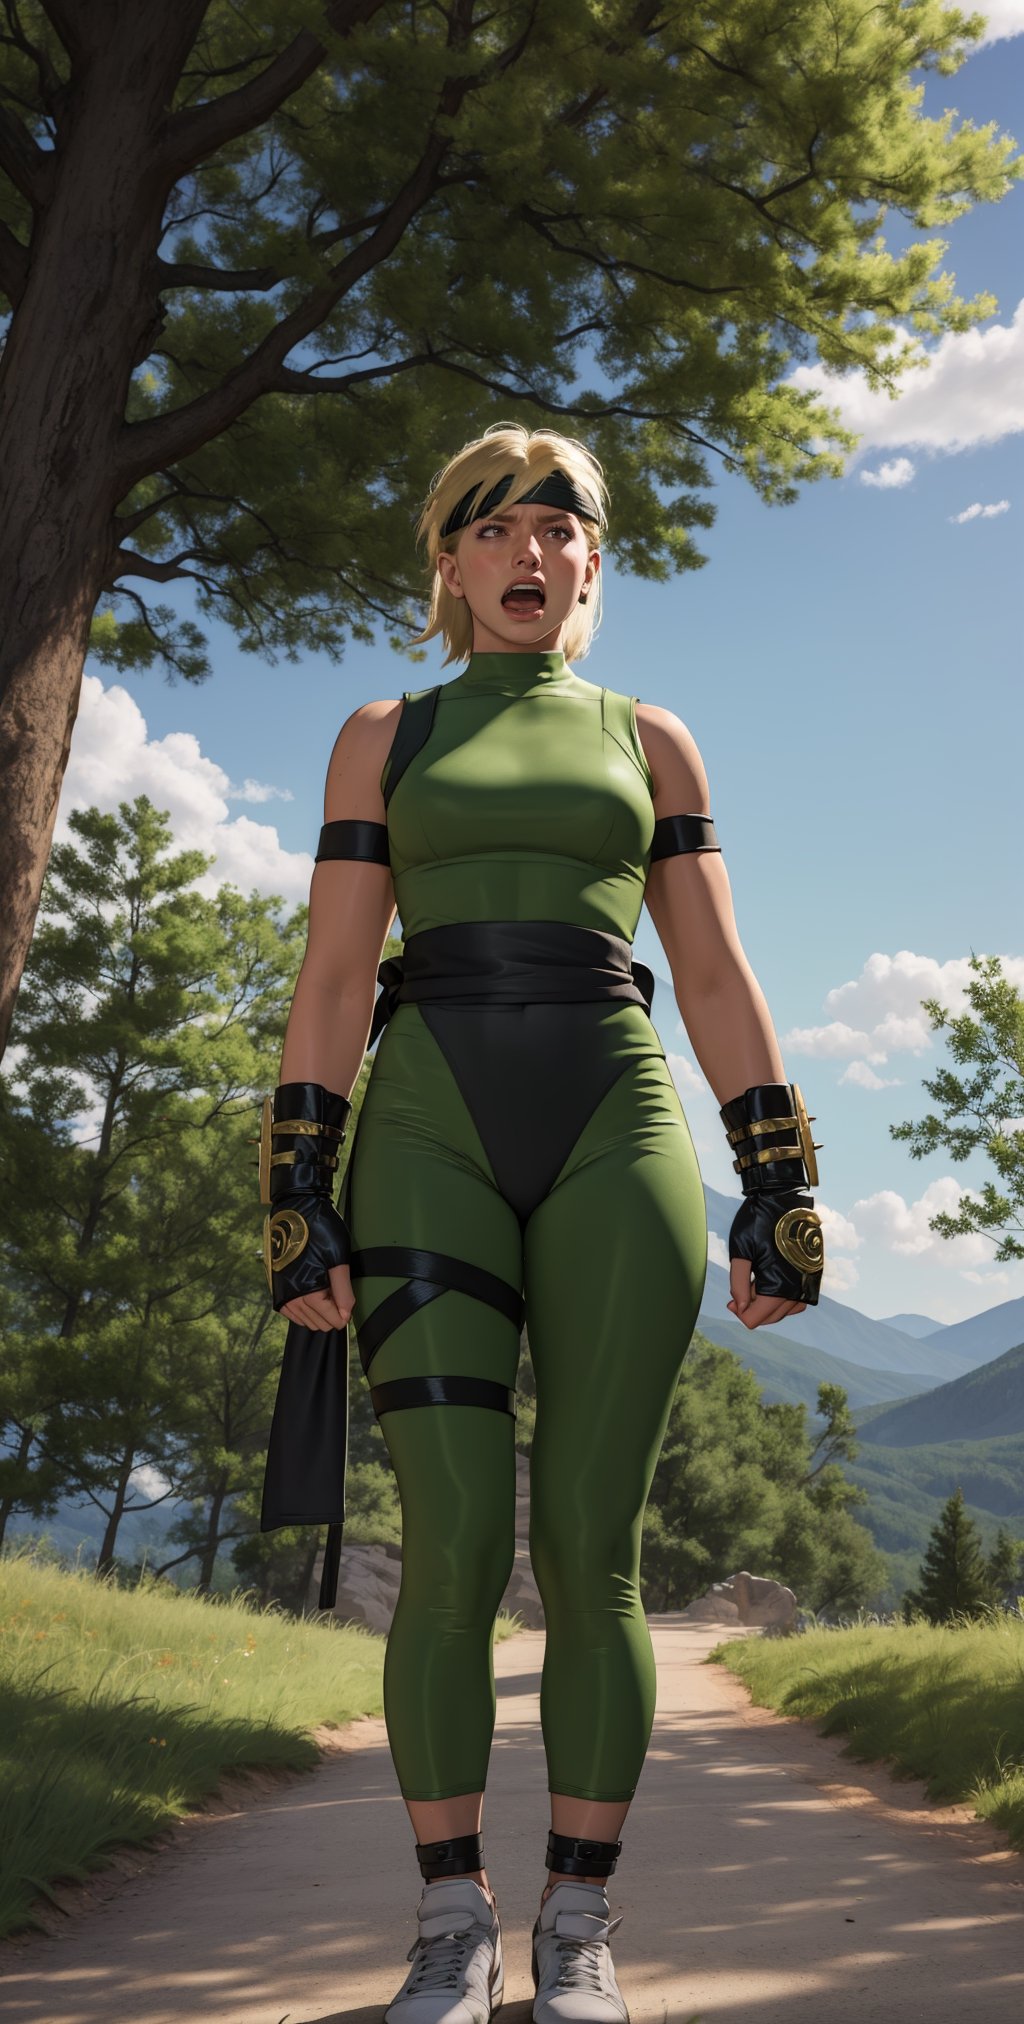 Sonyamk1, blonde hair, brown eyes, headband, black bracers,green crop top, green panyhose, black sash, white shoes, looking intense, angry, mouth open, yelling, 
dynamic shot, punching, uppercut, from_below, outside, mountains, trees, blue sky, extreme detail, hdr, beautiful quality, 